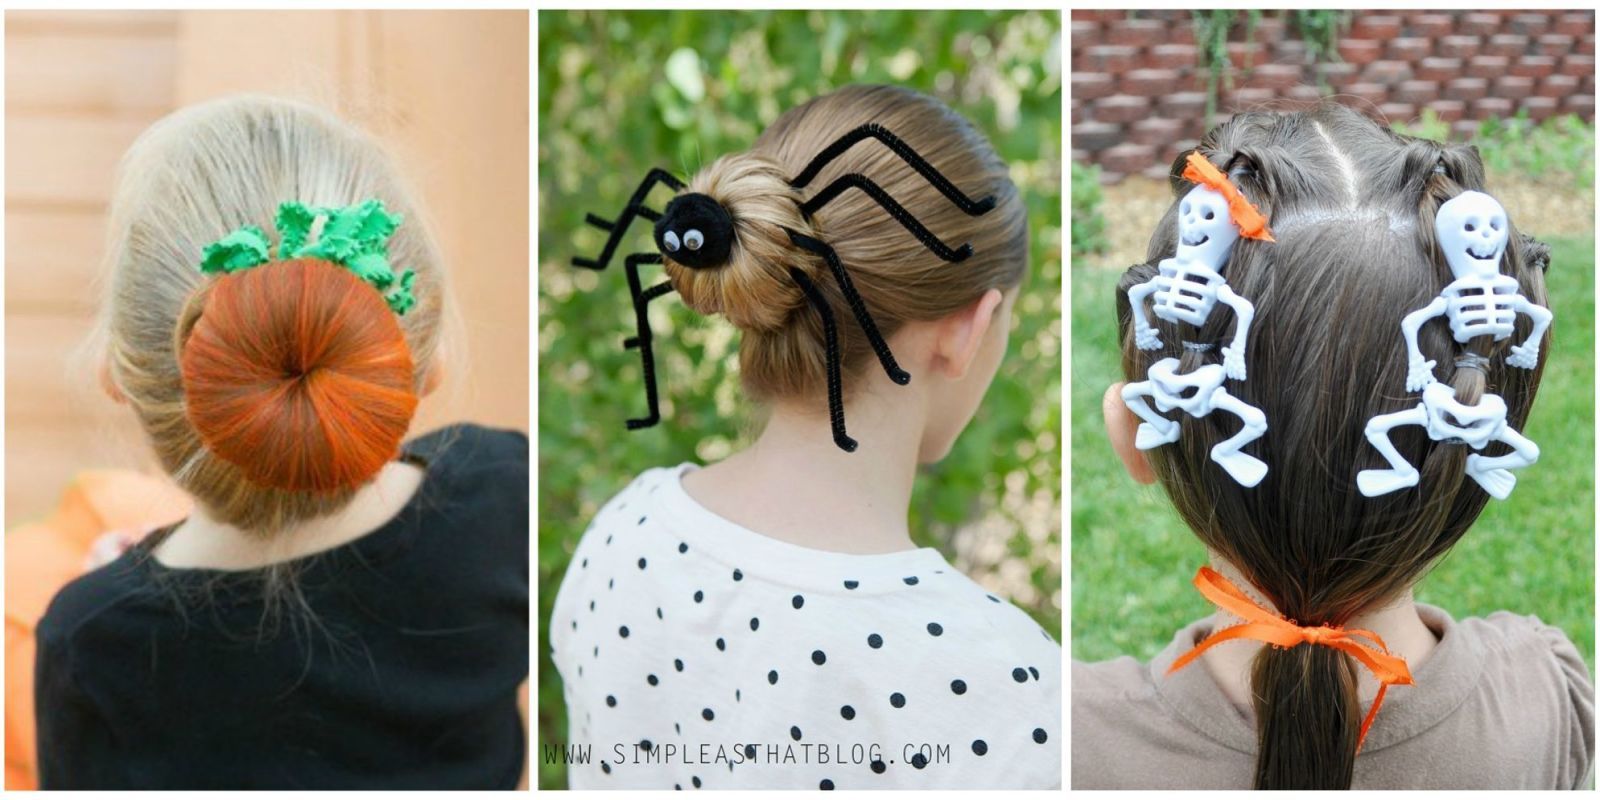 Halloween Hairstyles - Tangled Weave Spider Web Ponytail - YouTube